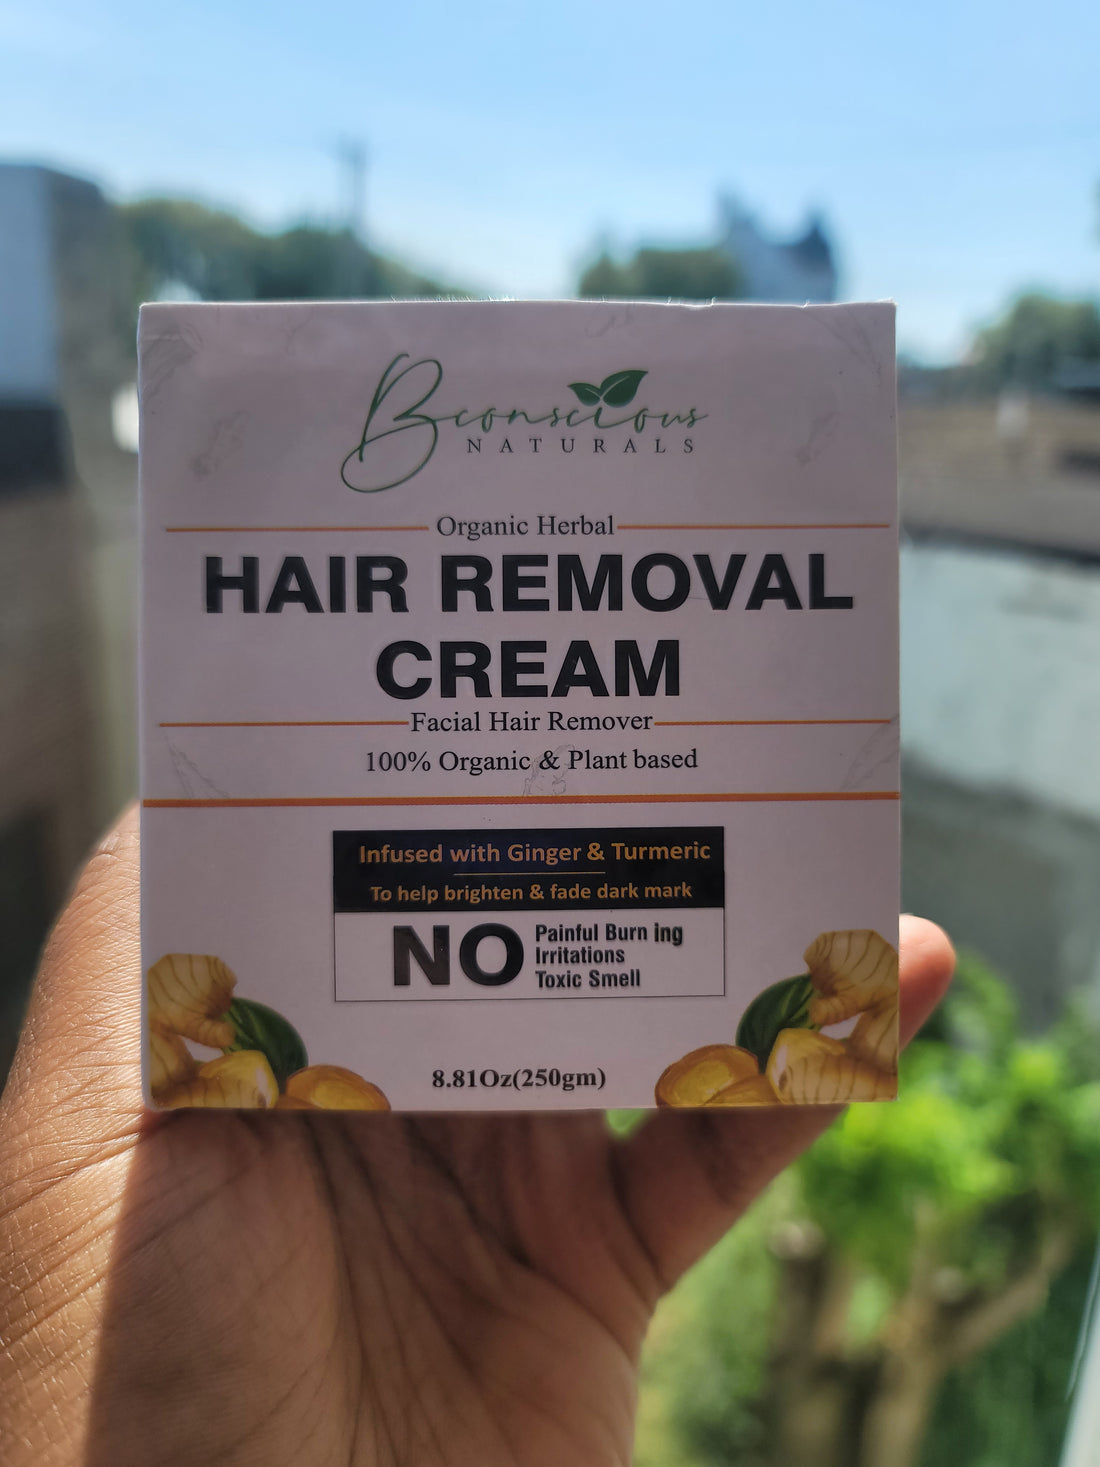 Organic hair remover cream to remove facial hair in women due to pcos or hirsutism. No more painful waxing,shaving,tweezing, or plucking unwanted hair.